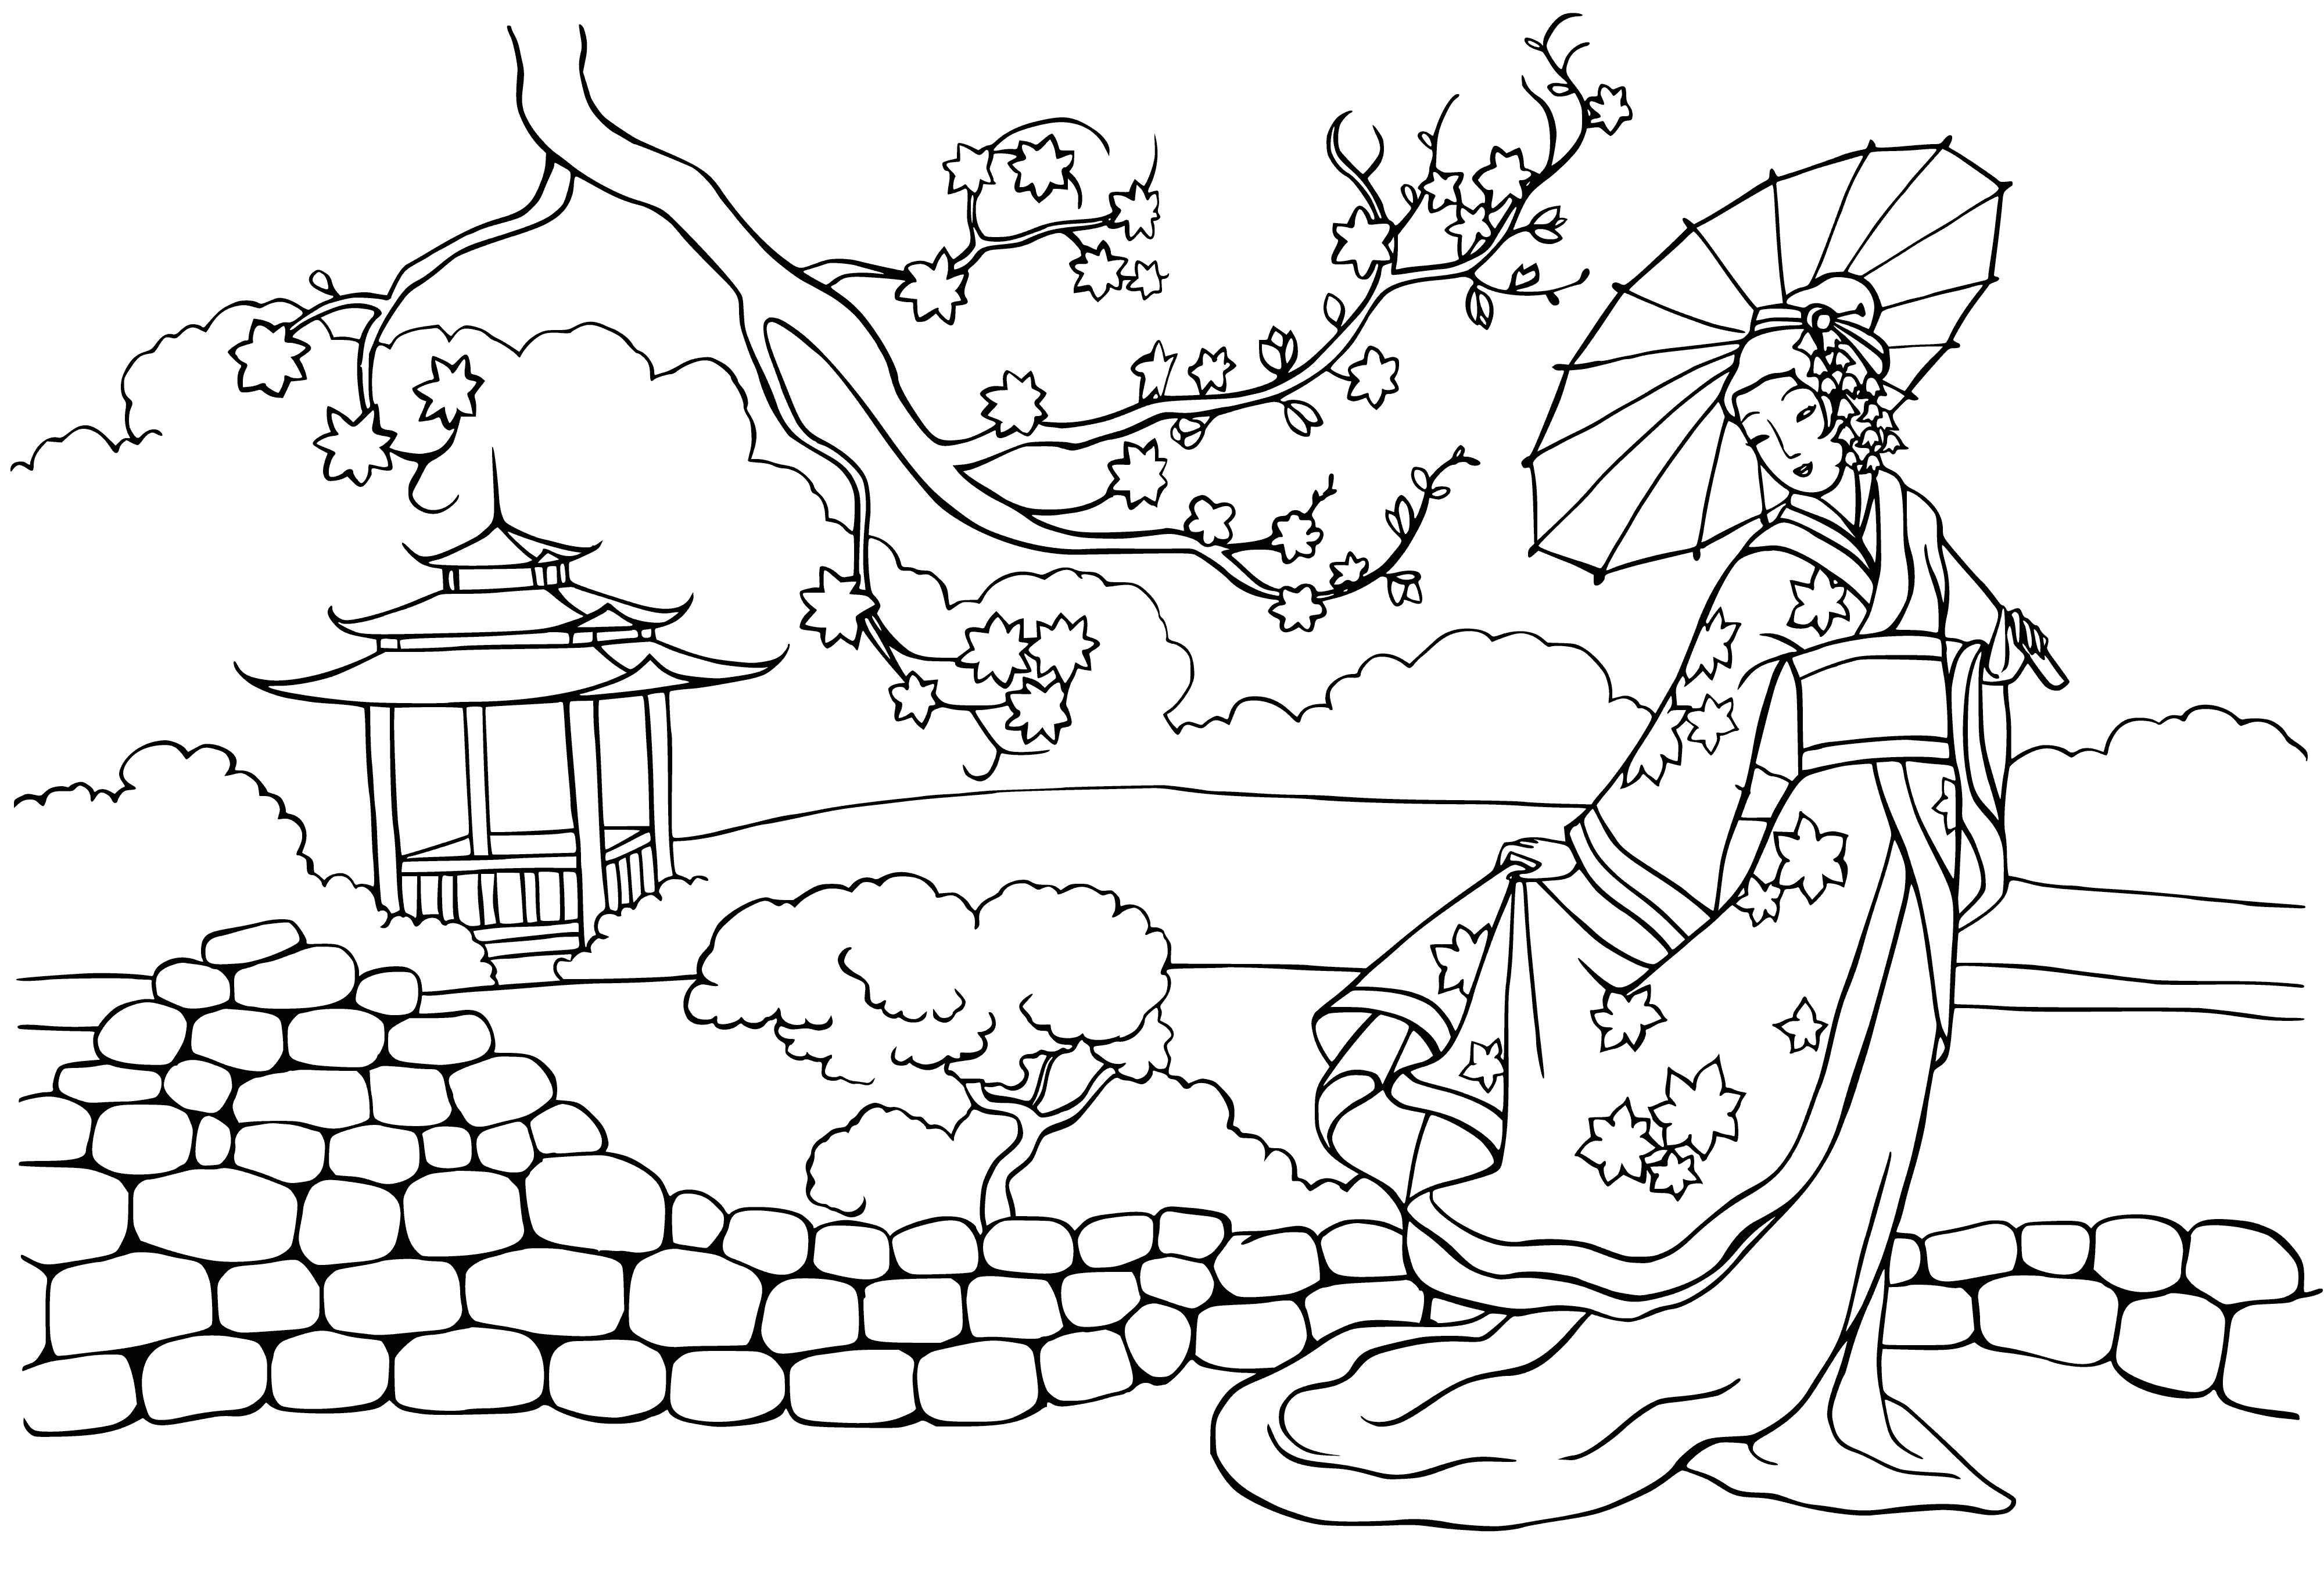 coloring page: Princess in beautiful dress with long train stands in front of a castle, holding a veil, with an updo and braids with flowers in her hair.